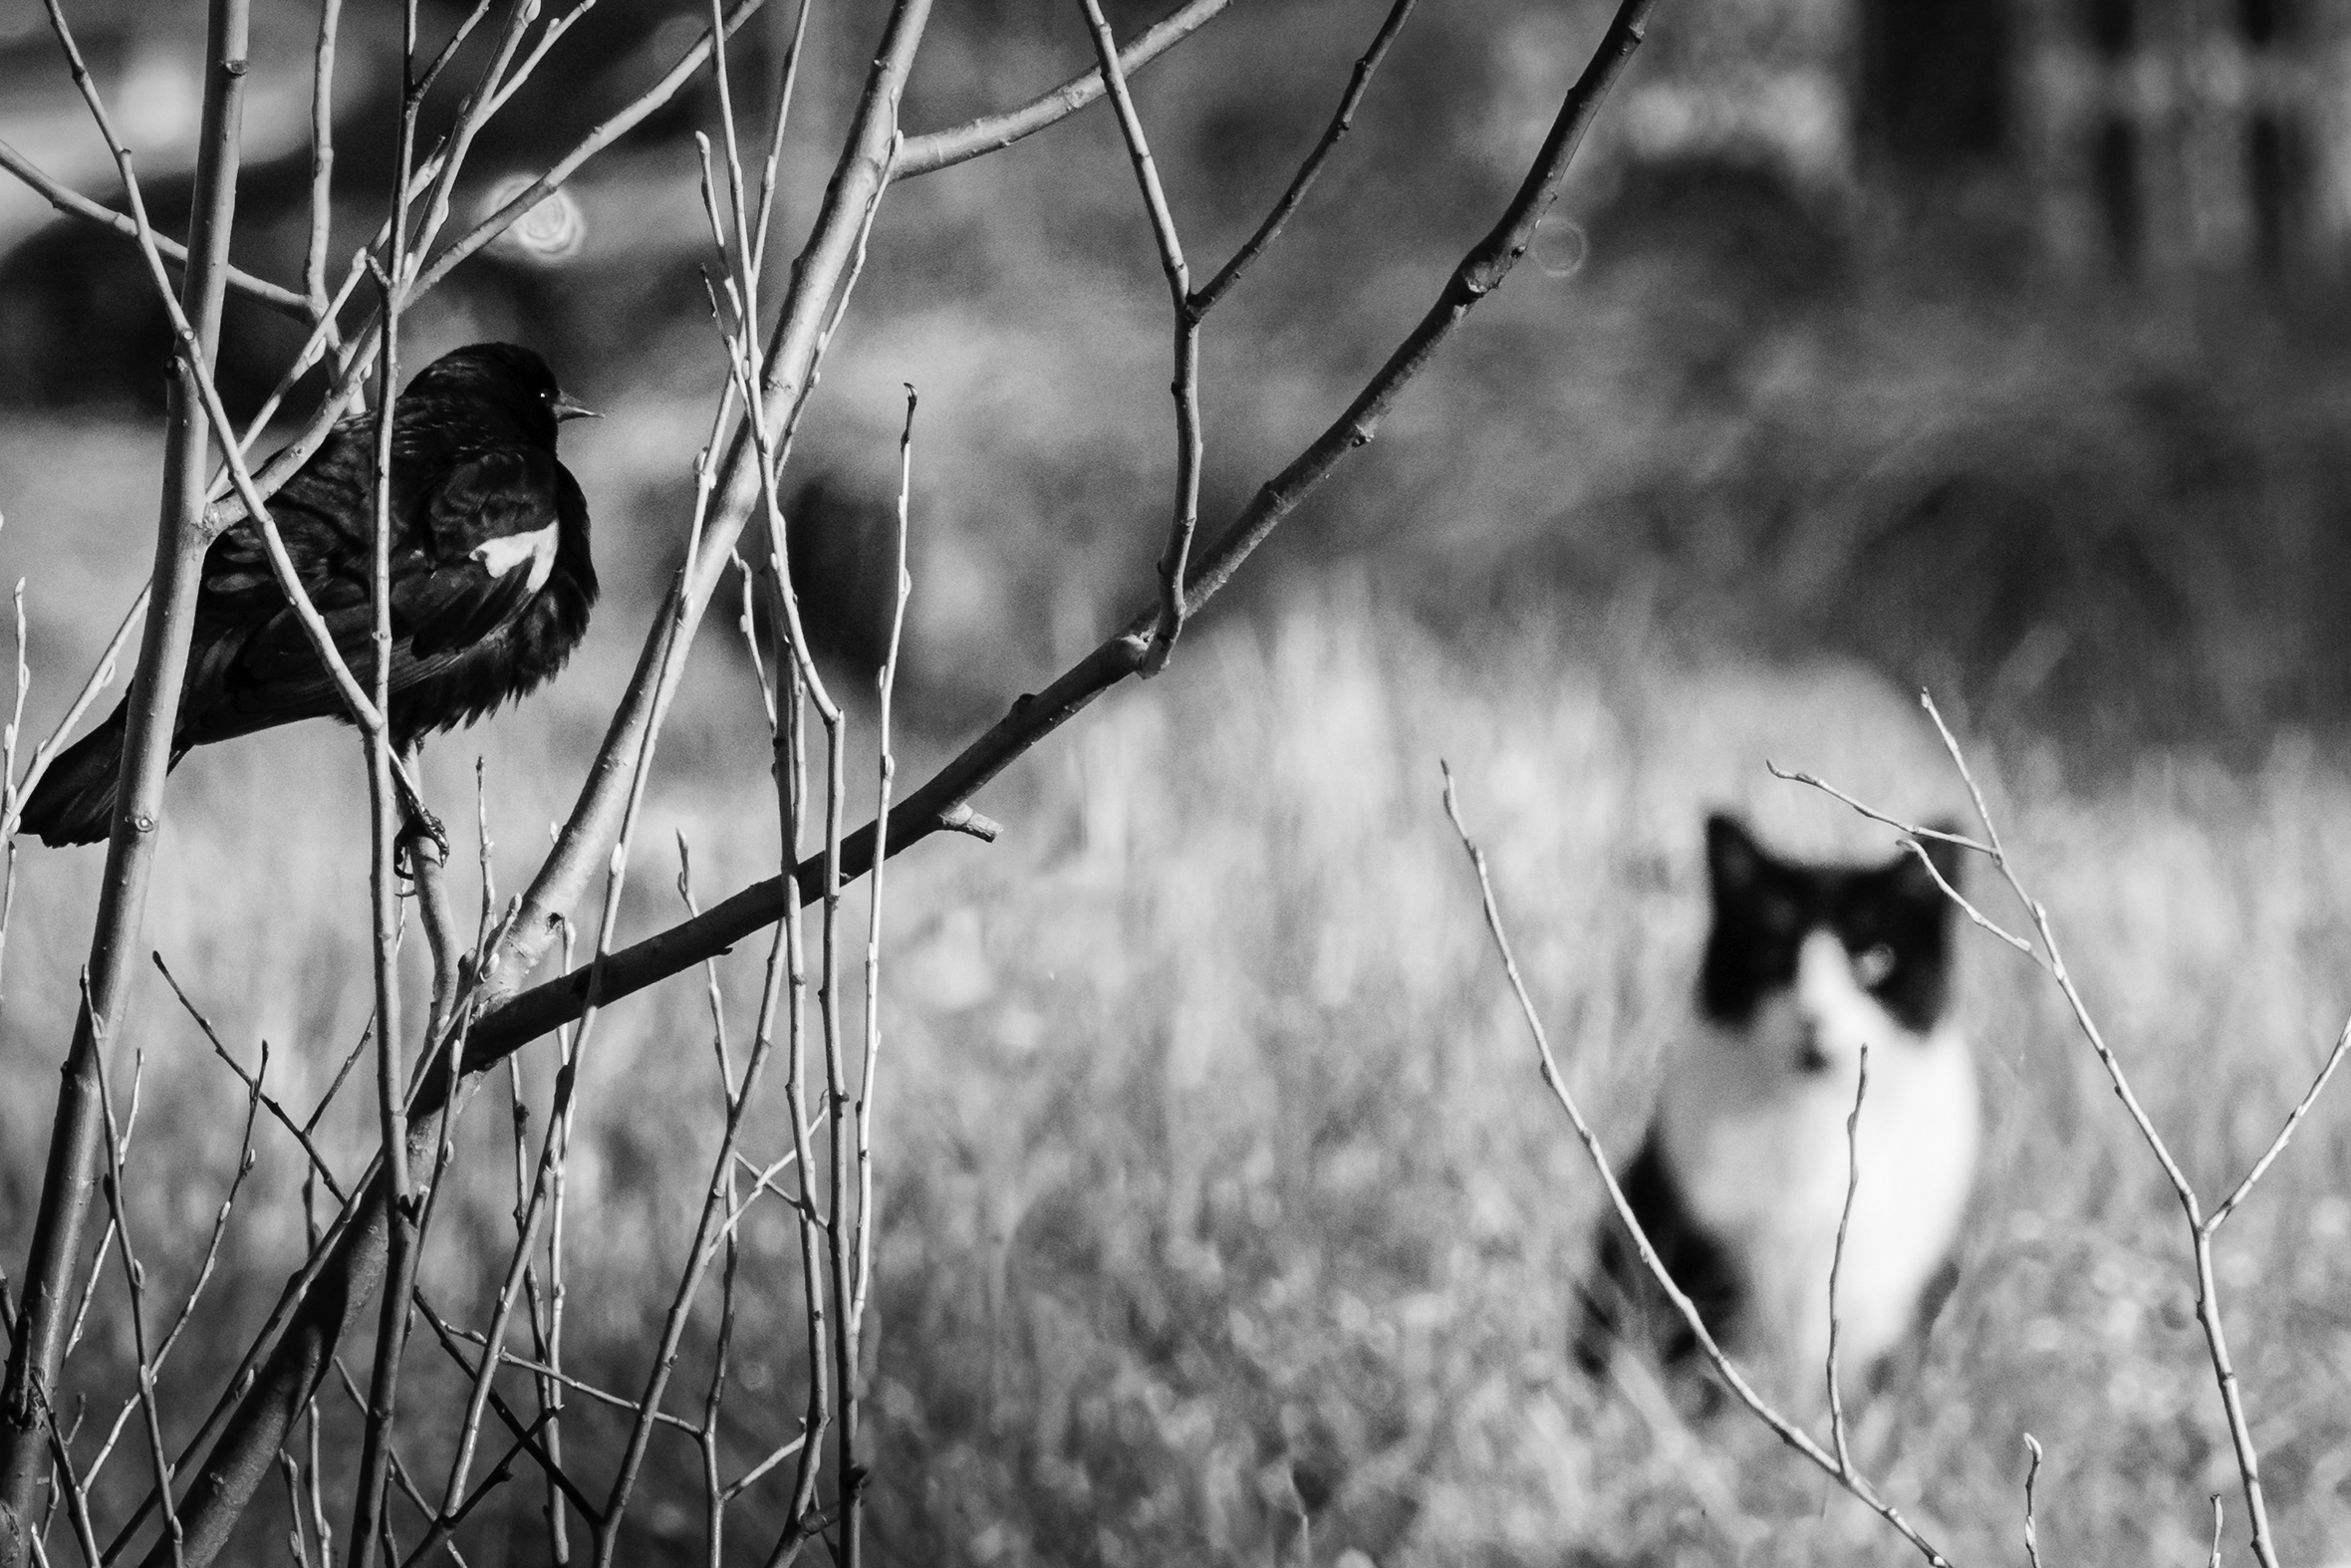 A close-up of a tiny bird sitting on bare branches with a tuxedo cat staring at it from a distance.